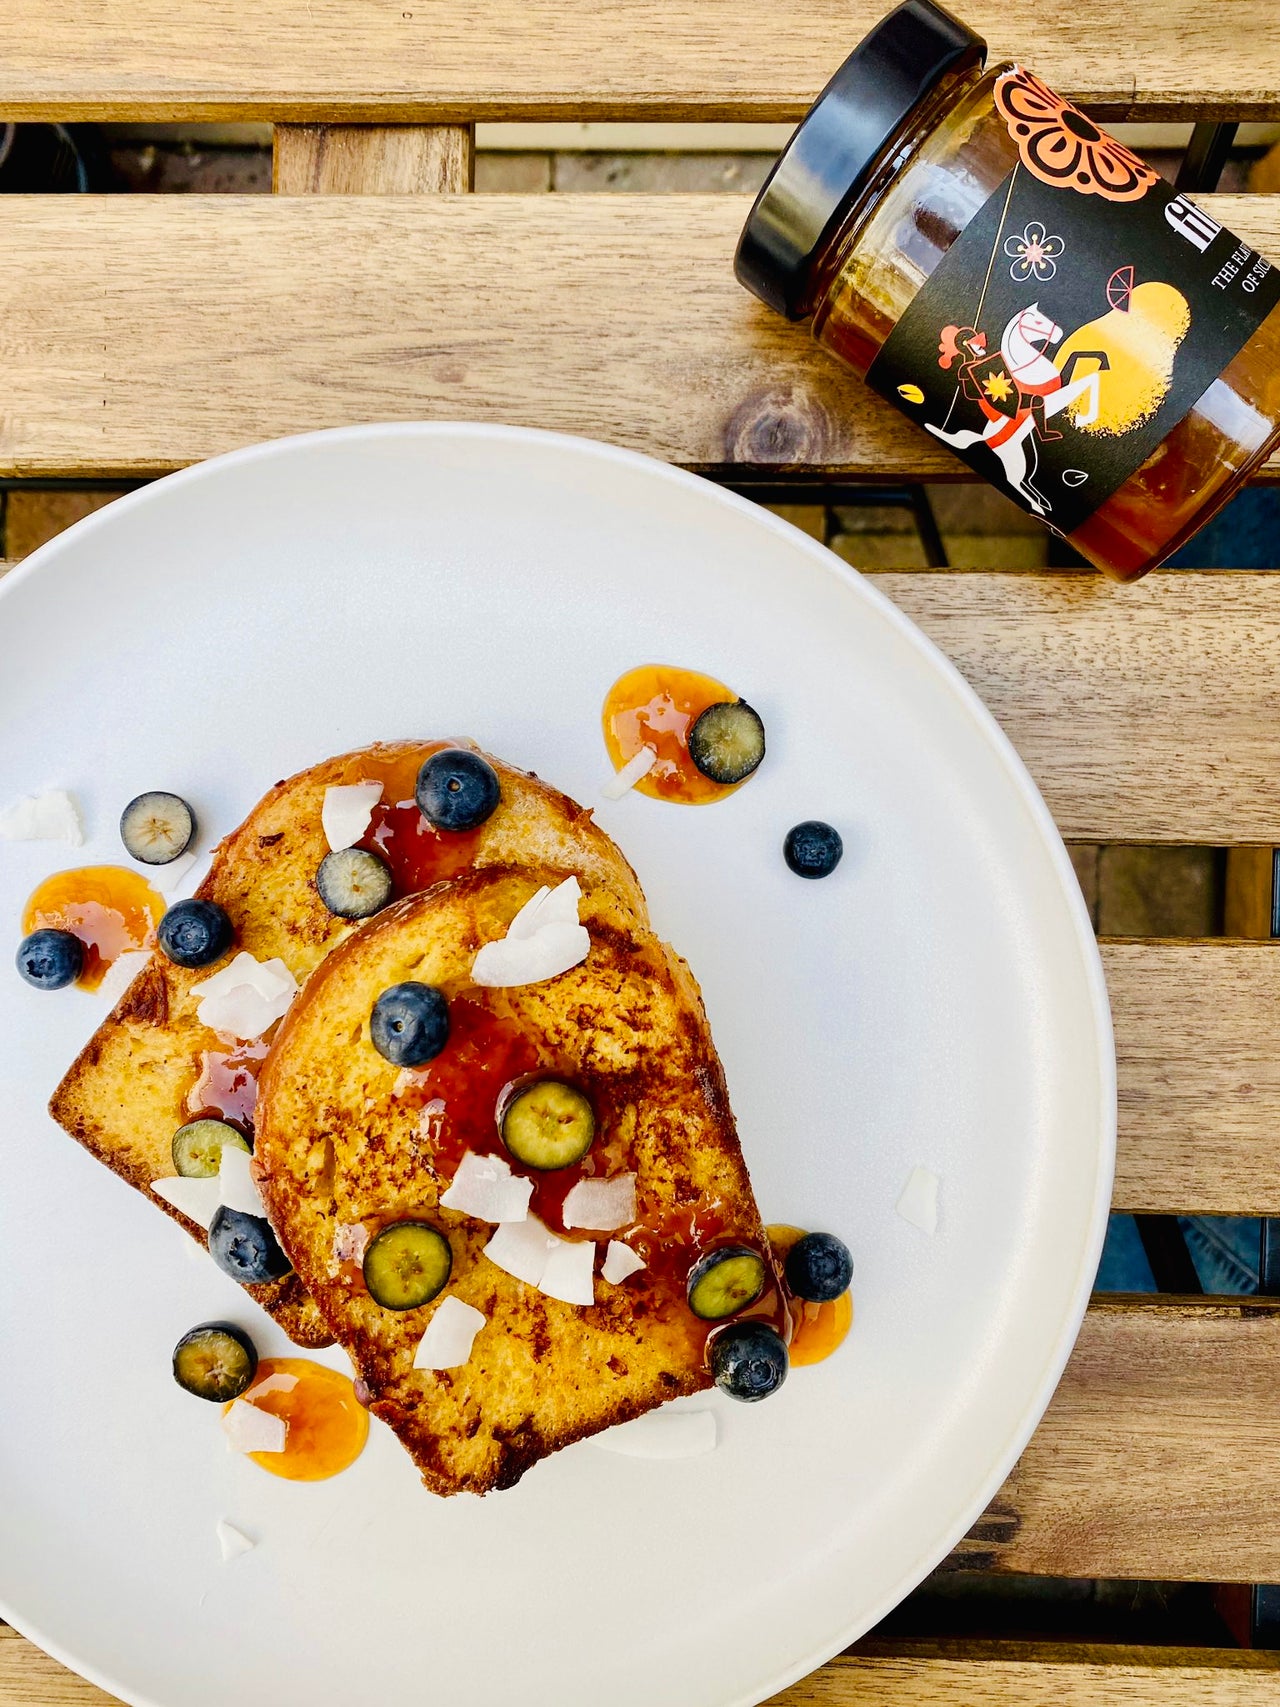 FRENCH TOAST WITH RAS EL HANOUT, APRICOT JAM AND BLUEBERRY